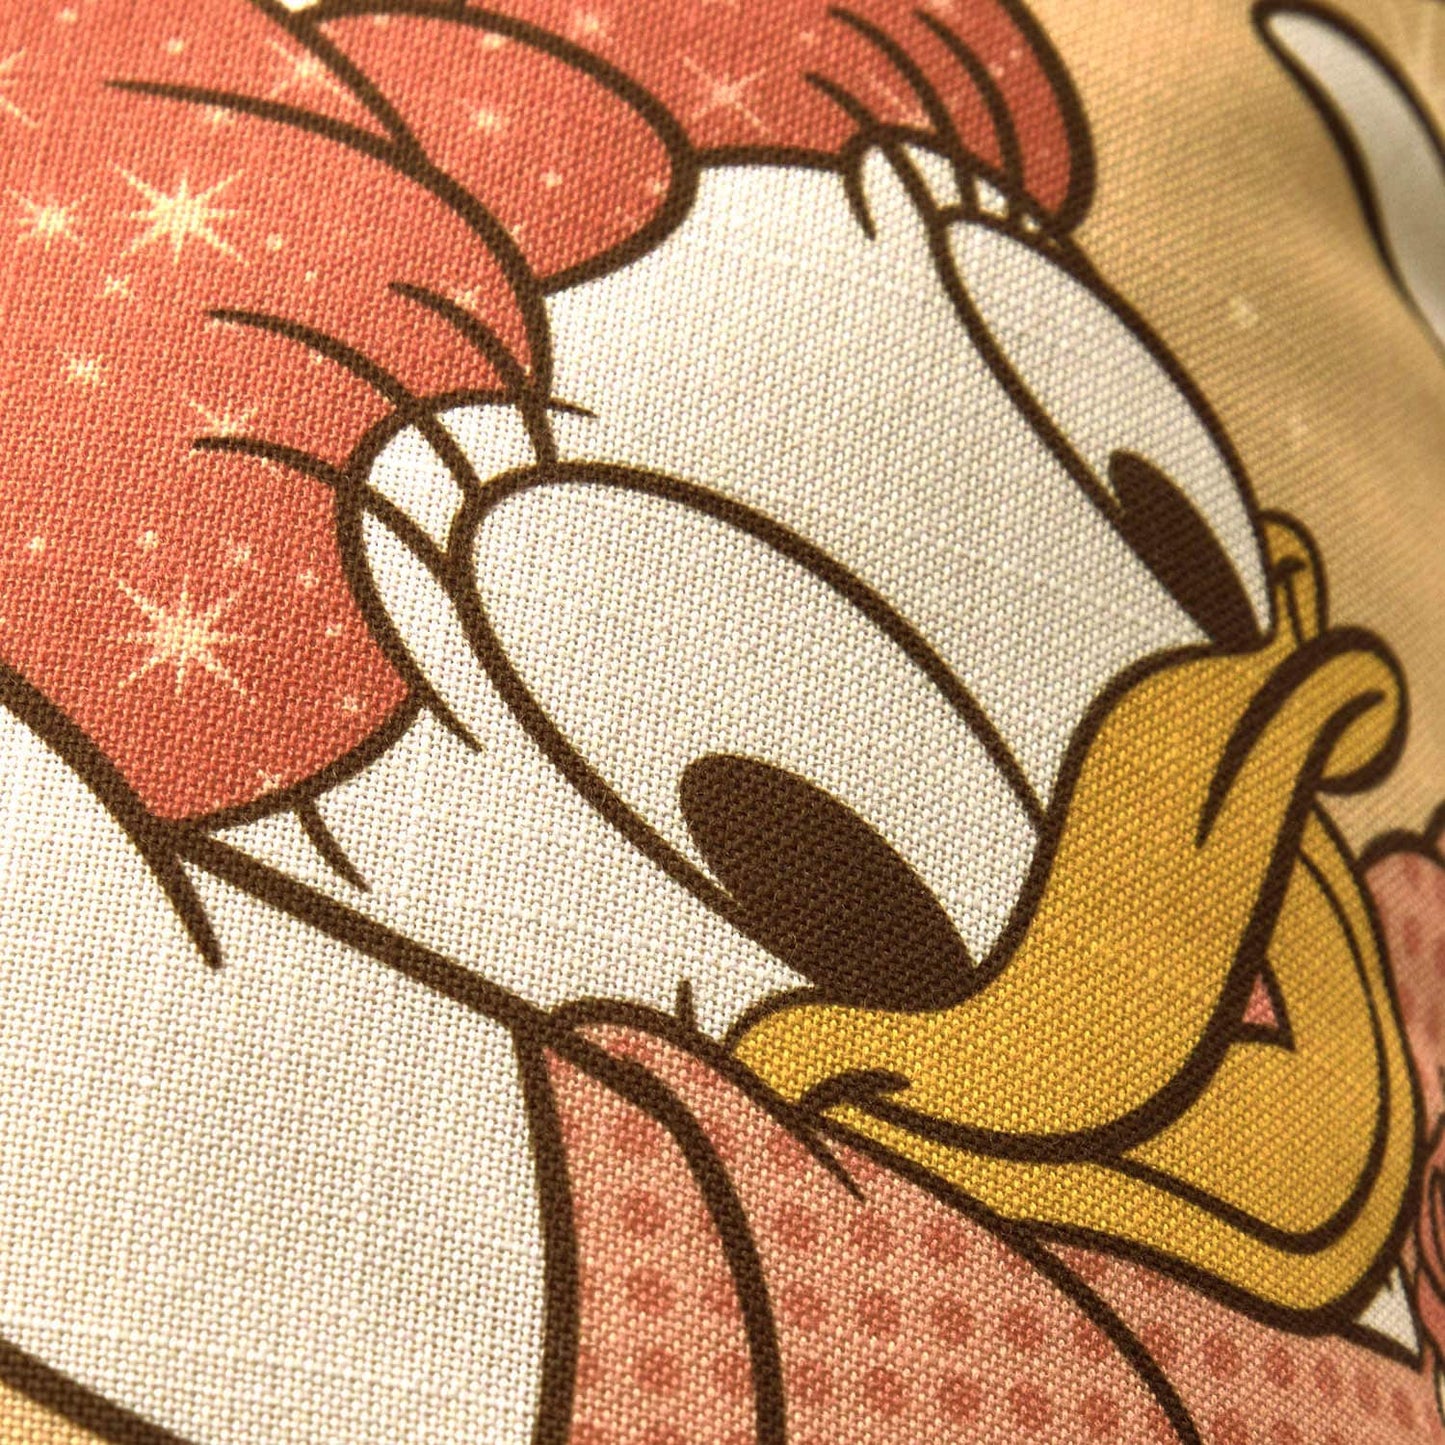  Mickey&Friends Stage Design Cushion Cover Two Types 